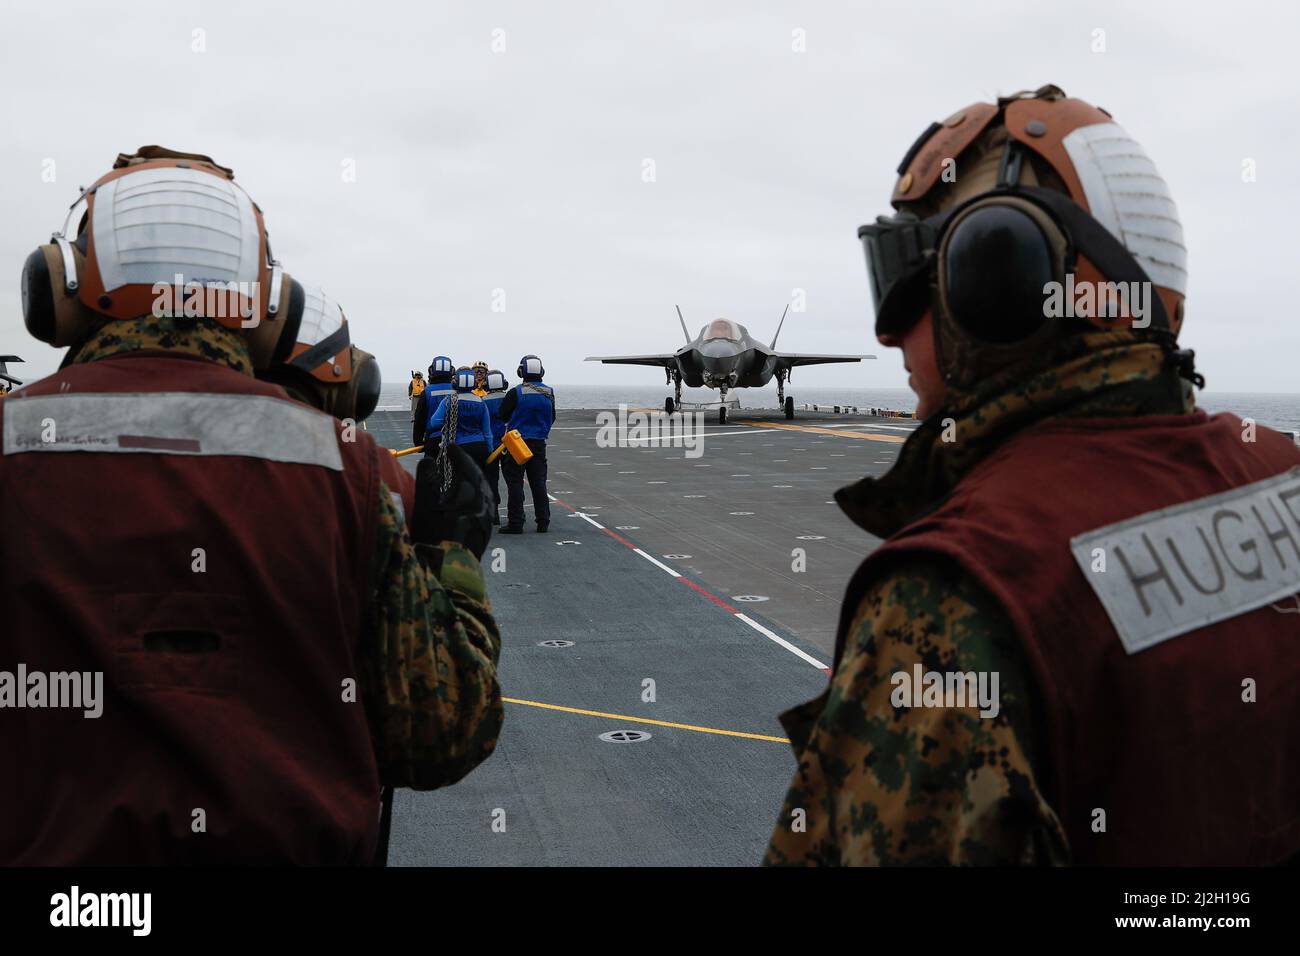 220331-N-CM110-1058 PACIFIC OCEAN (Mar. 31, 2022) – Marines assigned to Marine Aircraft Group 13 (MAG13), based out of Yuma, Ariz., watch as an F-35B Lightning aircraft taxies across the flight deck aboard amphibious assault ship USS Tripoli (LHA 7), Mar. 31. VMX-1 is embarked aboard Tripoli as part of the U.S. Marine Corps’ Lightning carrier concept demonstration. The Lightning carrier concept demonstration shows Tripoli and other amphibious assault ships are capable of operating as dedicated fixed-wing carrier platforms, capable of bringing fifth generation Short Takeoff/Vertical Landing air Stock Photo